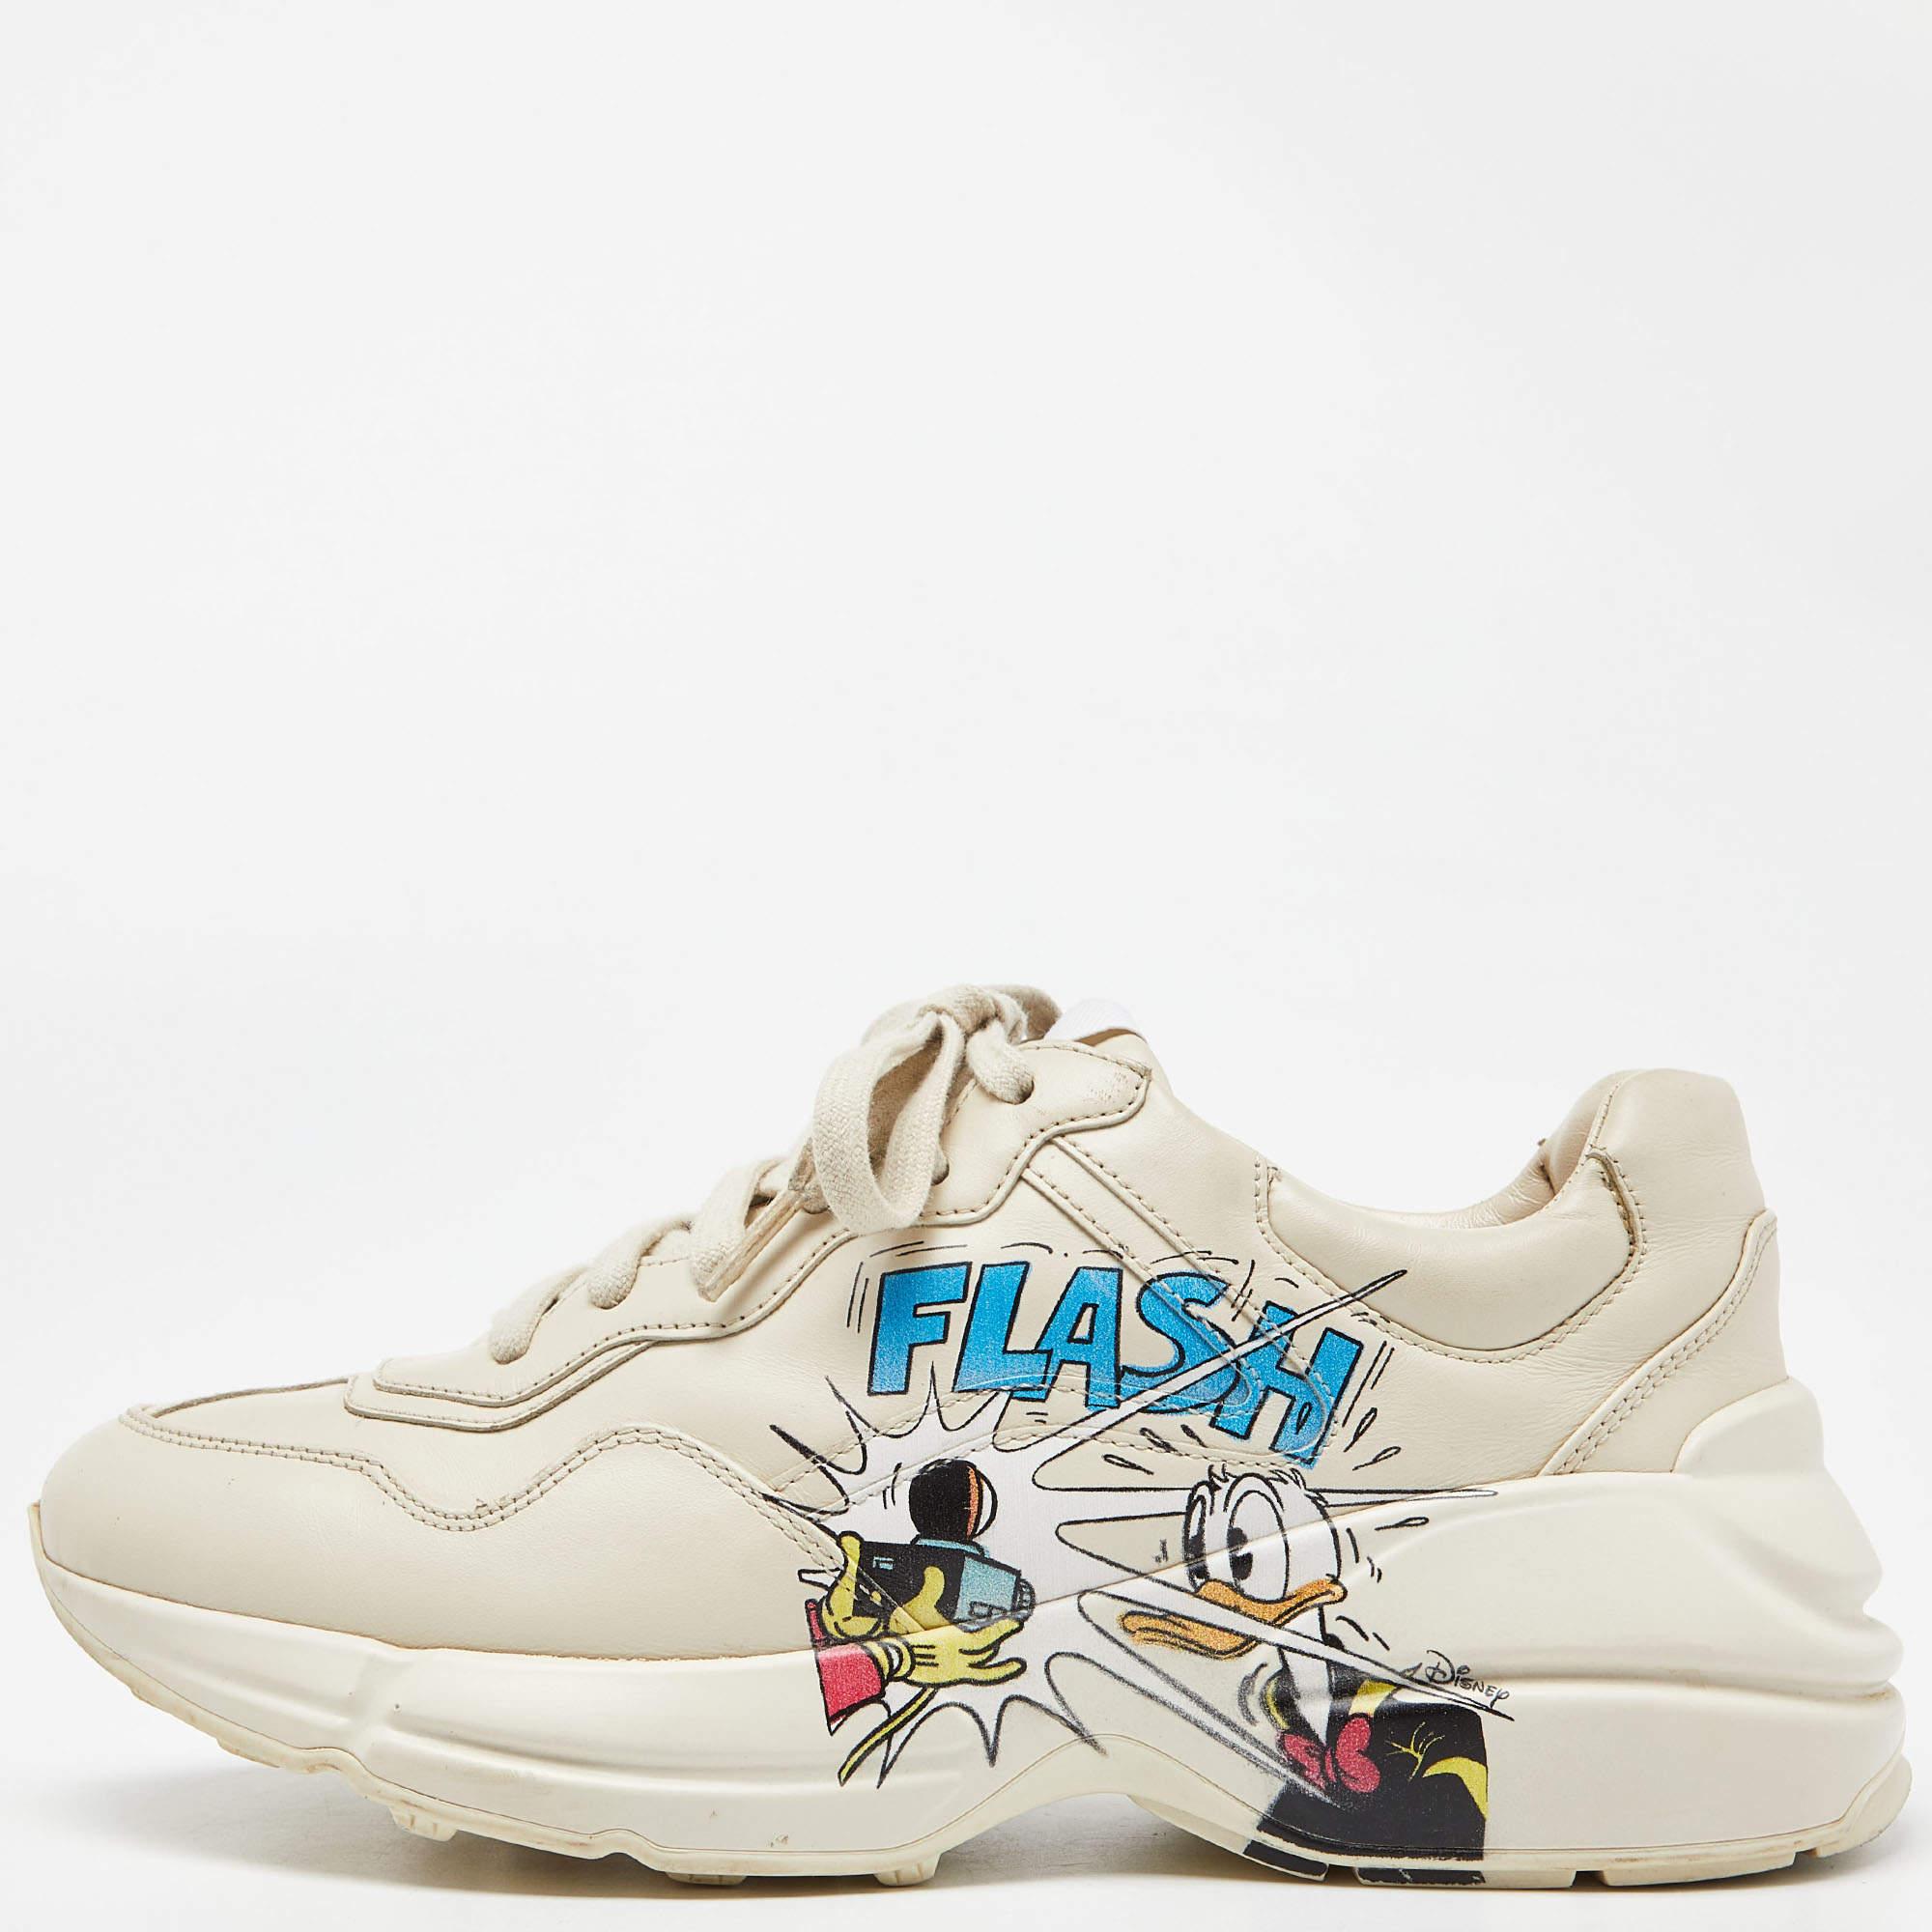 Gucci x Disney Donald Duck Cream Leather Rhyton Sneakers Size 38 2